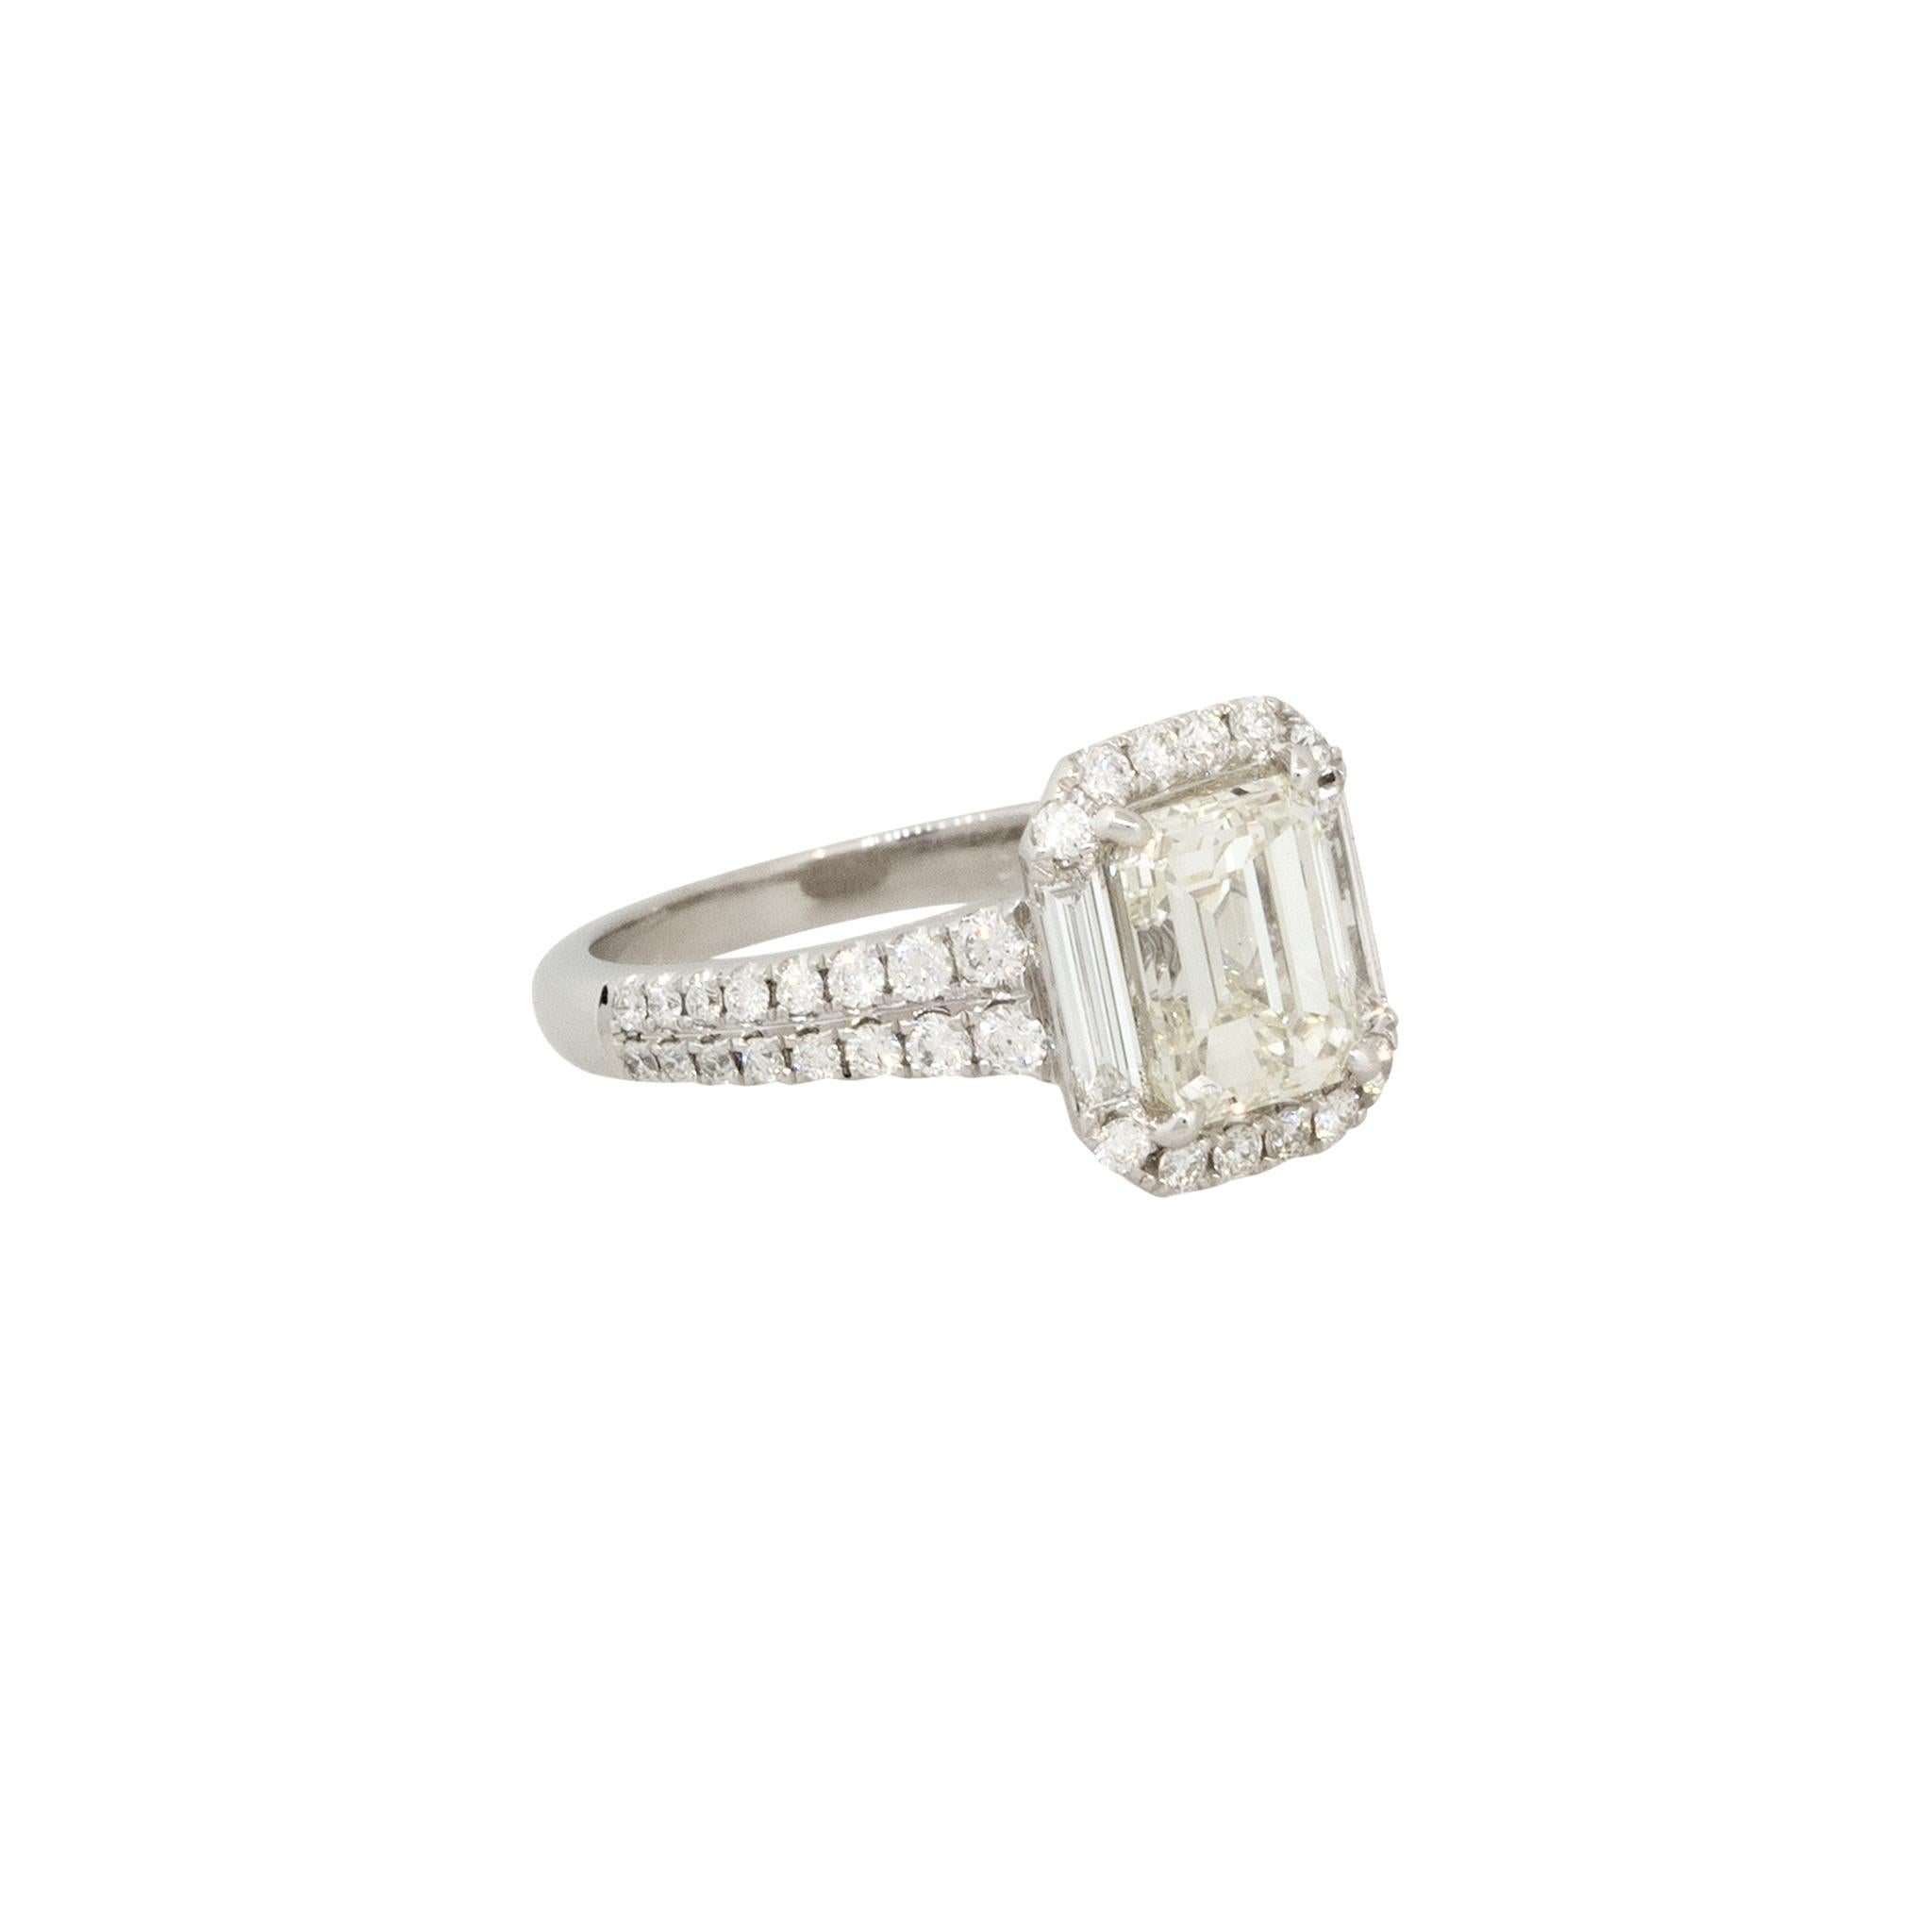 18k White Gold 2.87ctw Emerald Cut Diamond Halo Engagement Ring

Raymond Lee Jewelers in Boca Raton -- South Florida’s destination for diamonds, fine jewelry, antique jewelry, estate pieces, and vintage jewels.

Style: Women's Emerald Halo